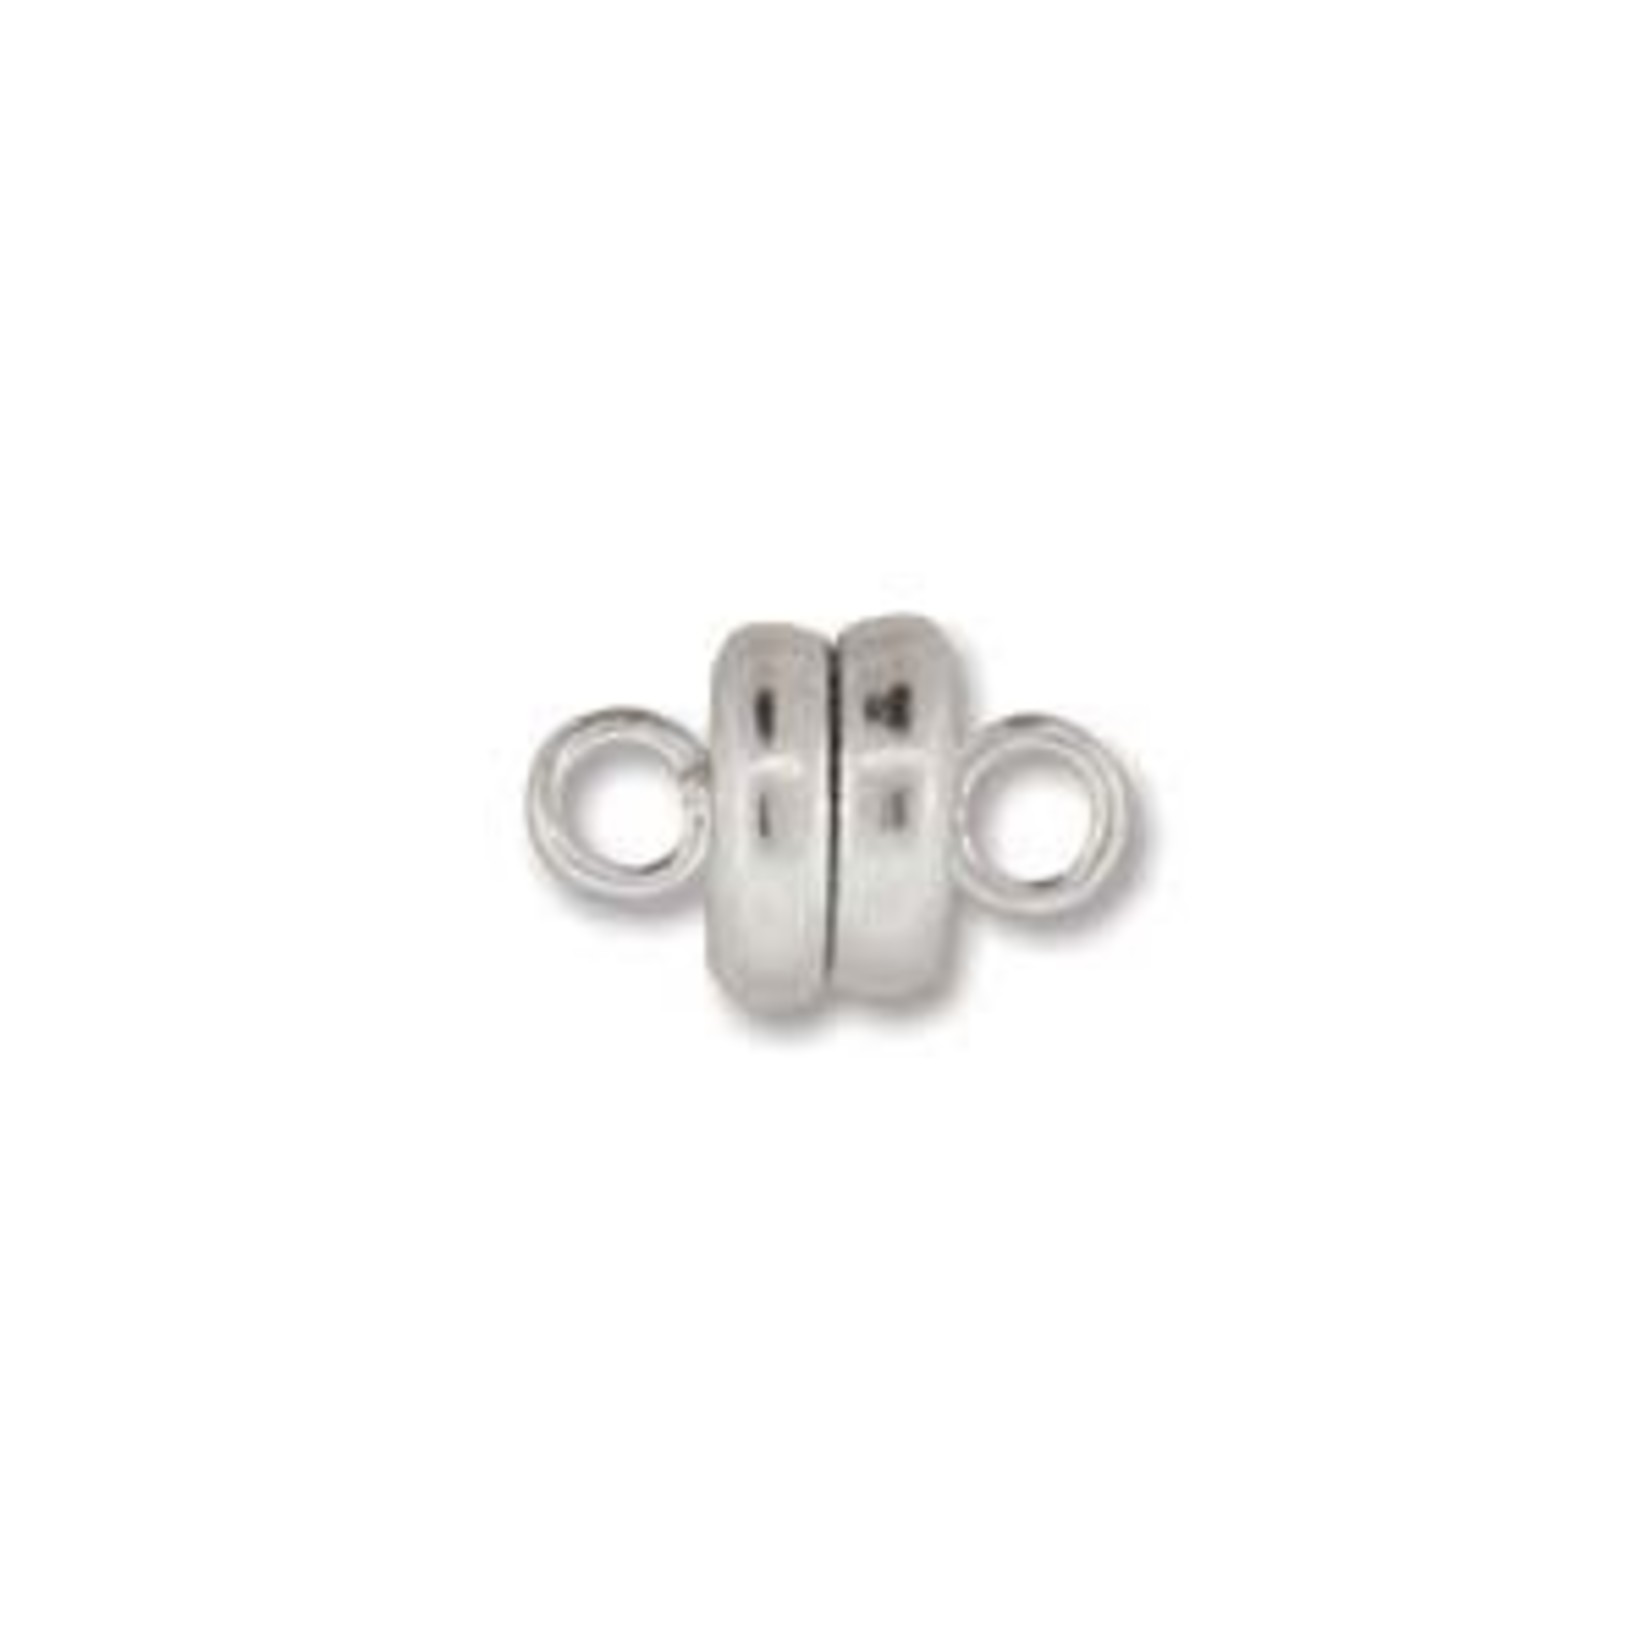 Beadsmith Magnetic Clasp 6mm Silver Plated - 36 Pieces